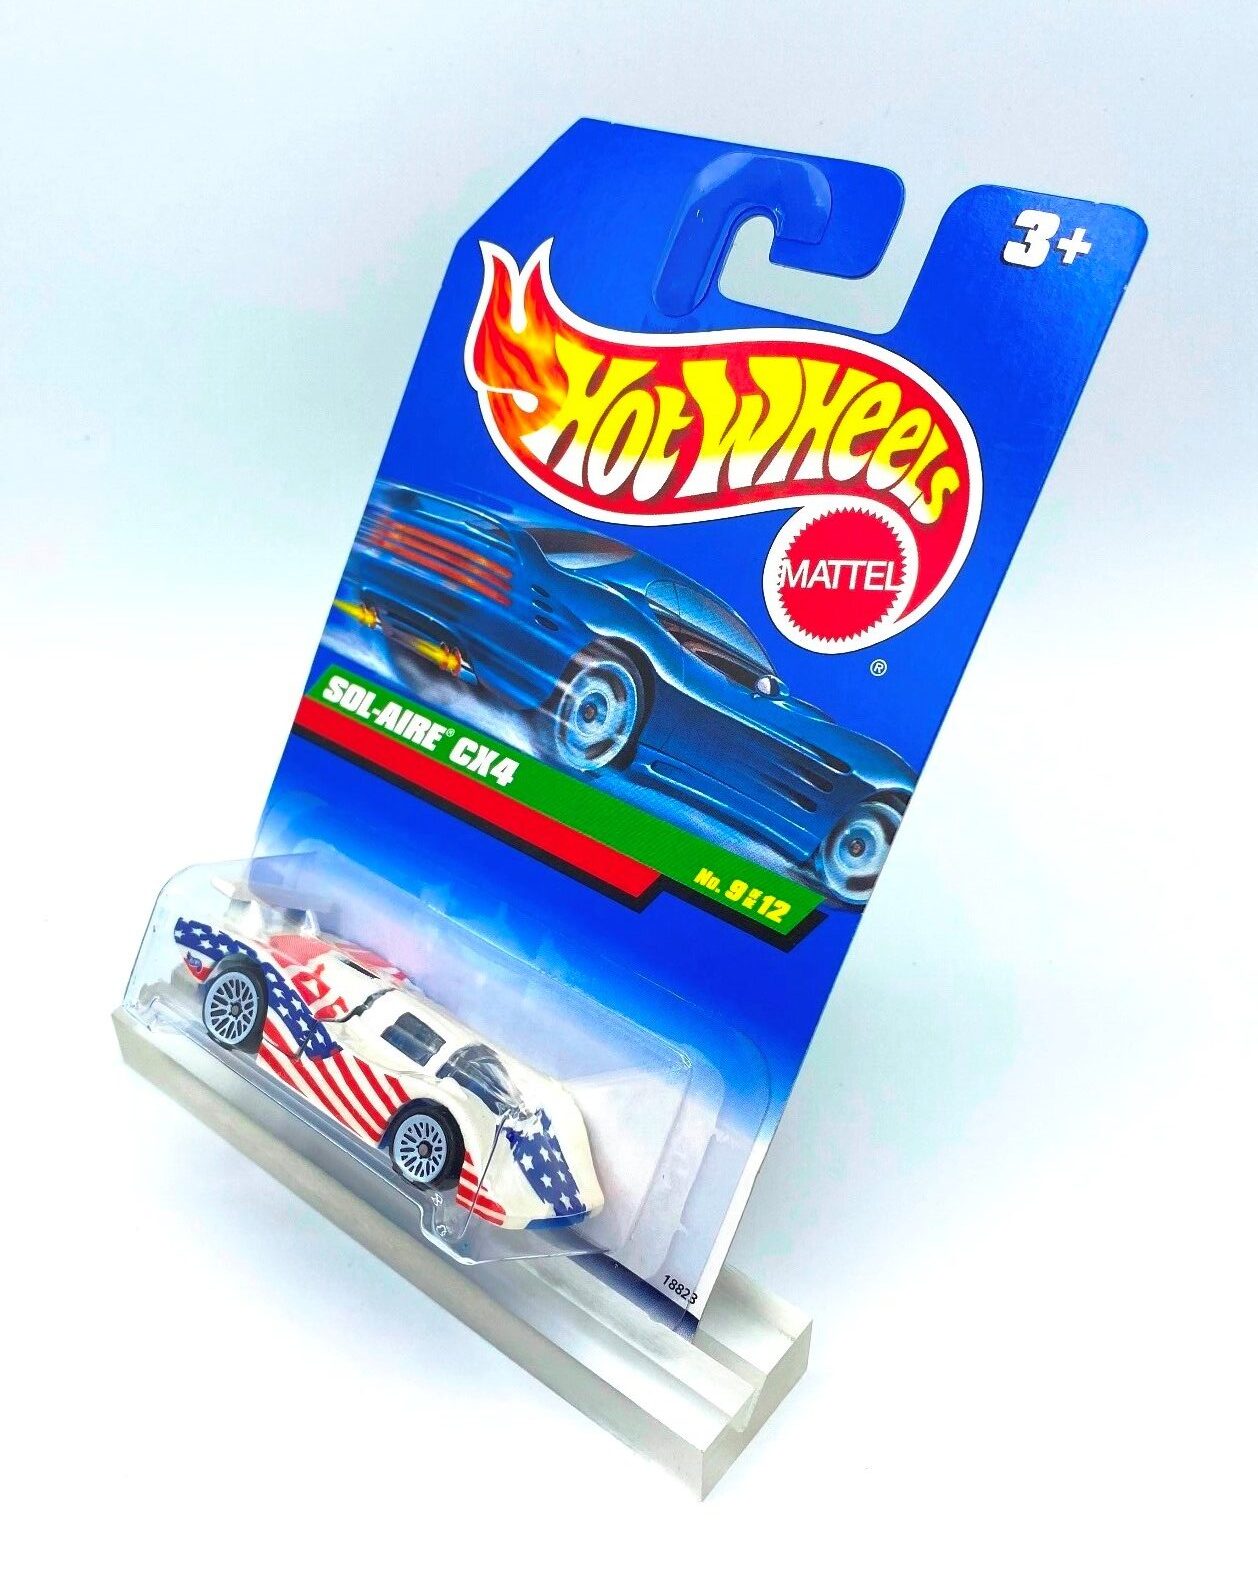 1998 Hot Wheels Treasure Hunt Series Sol-Aire CX4 Limited Edition Rare # 9 Of 12